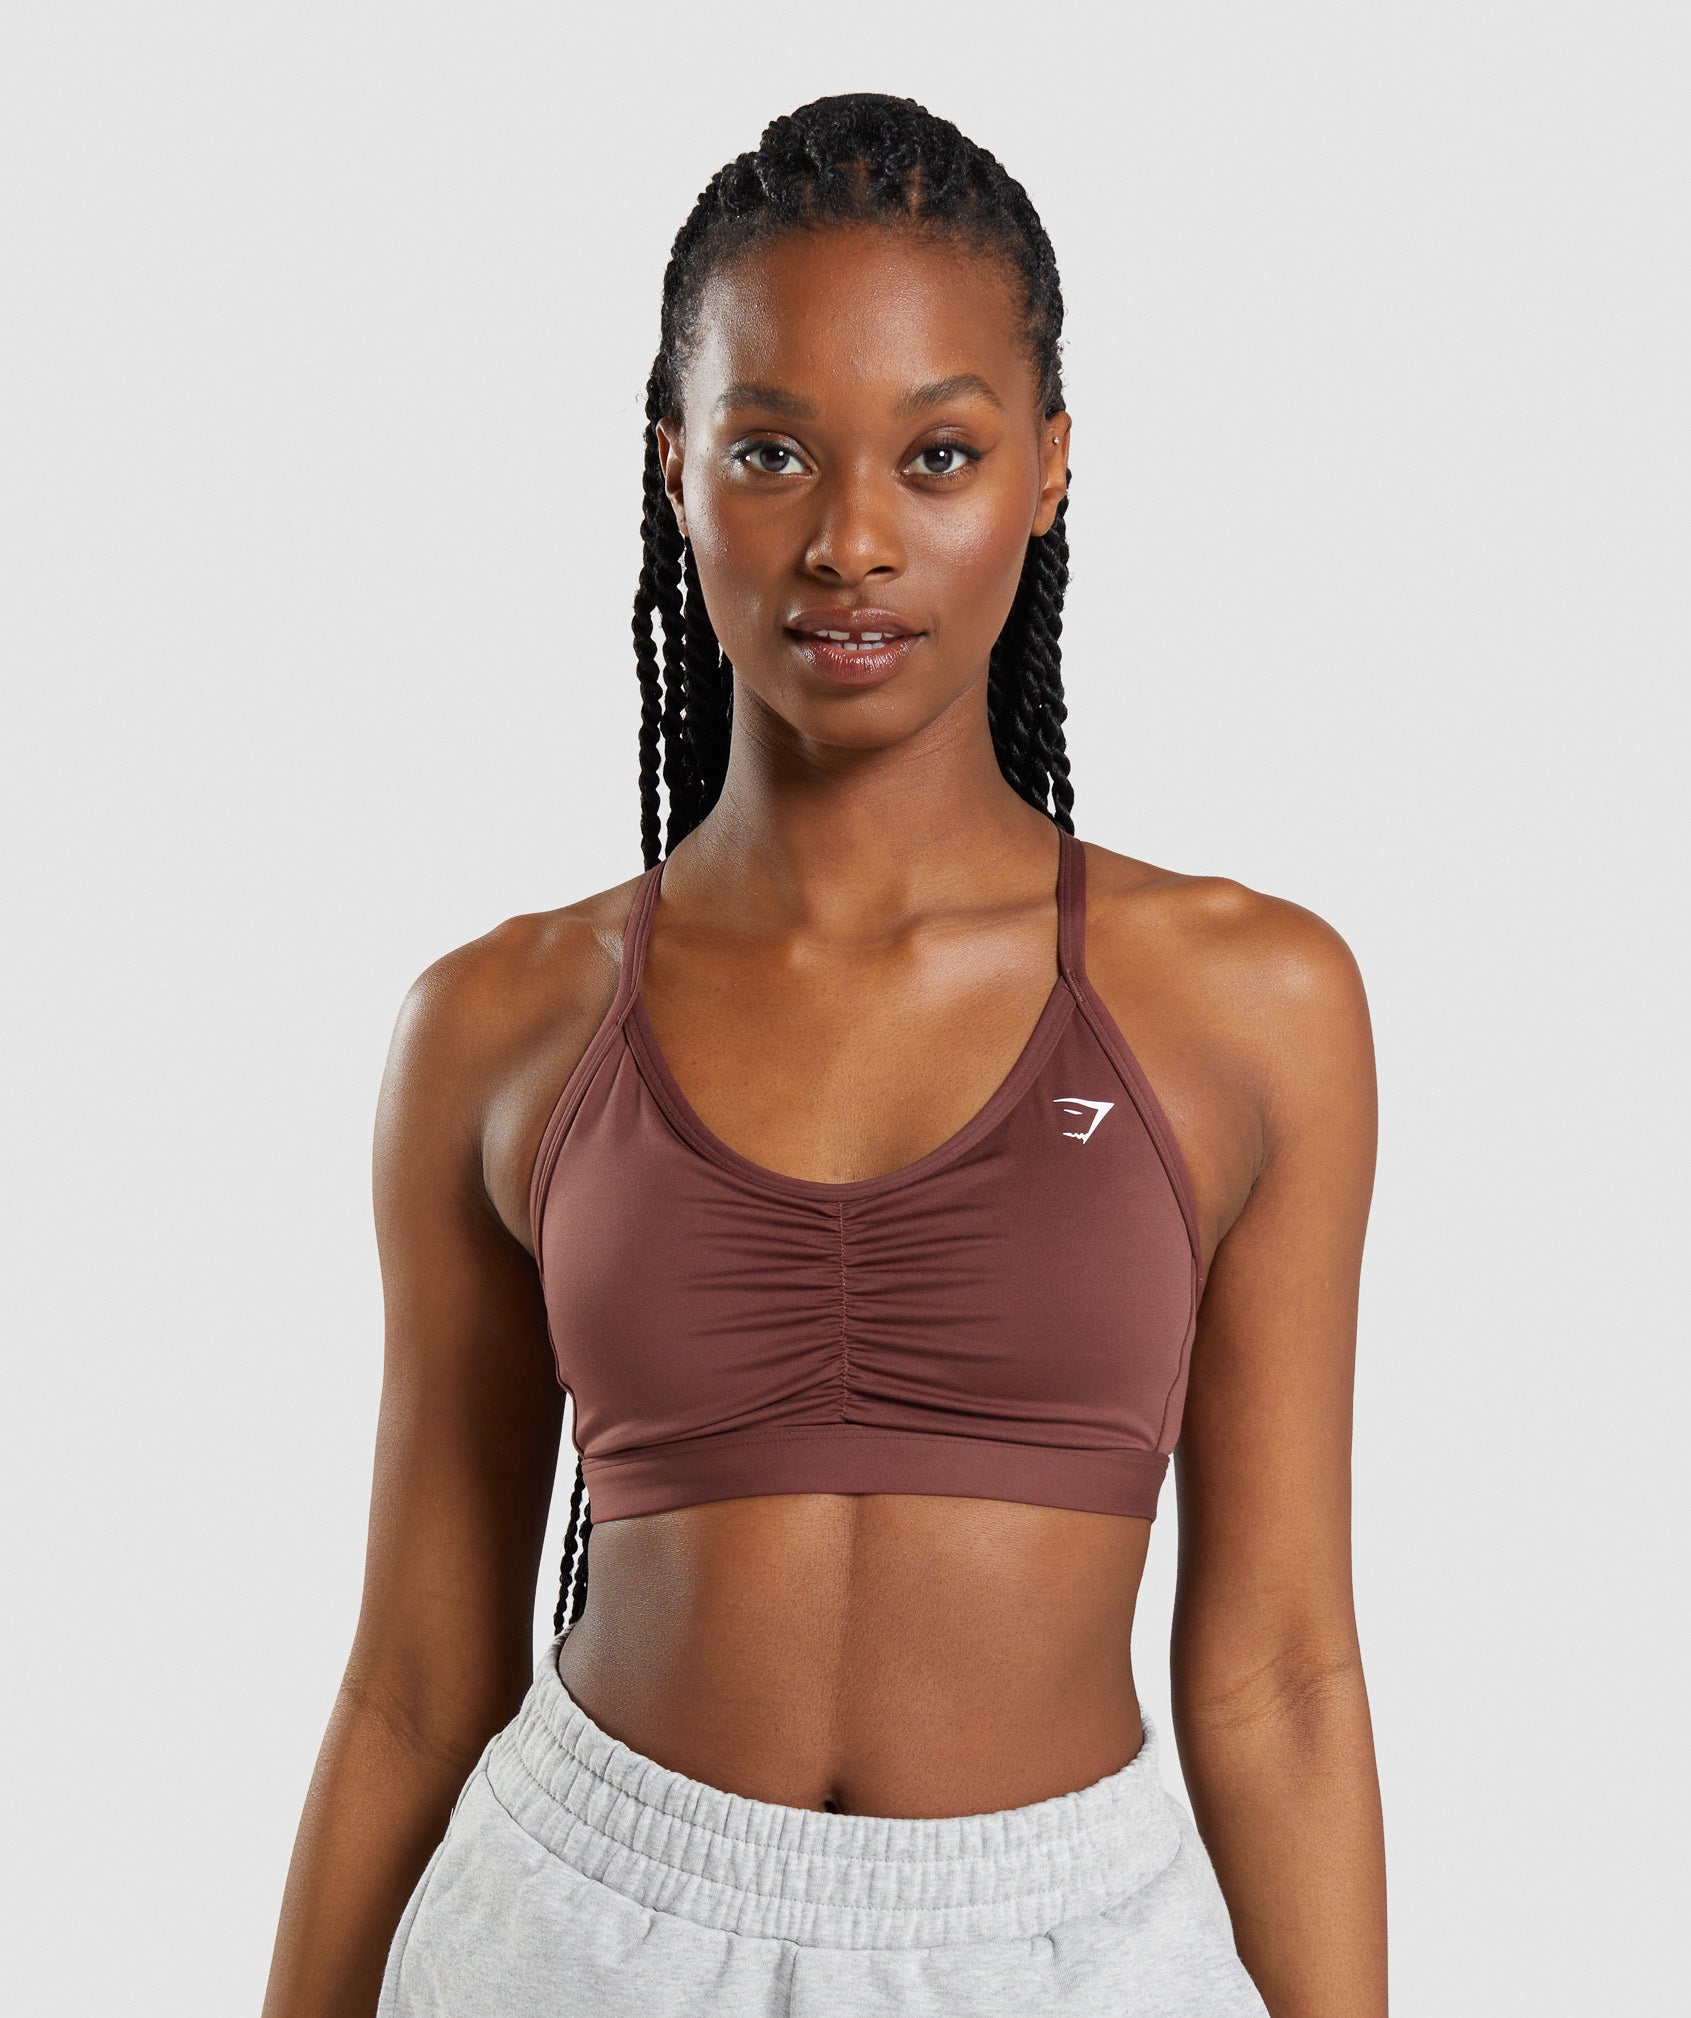 Gymshark Ruched Sports Bra Blue - $20 (33% Off Retail) - From Nicole